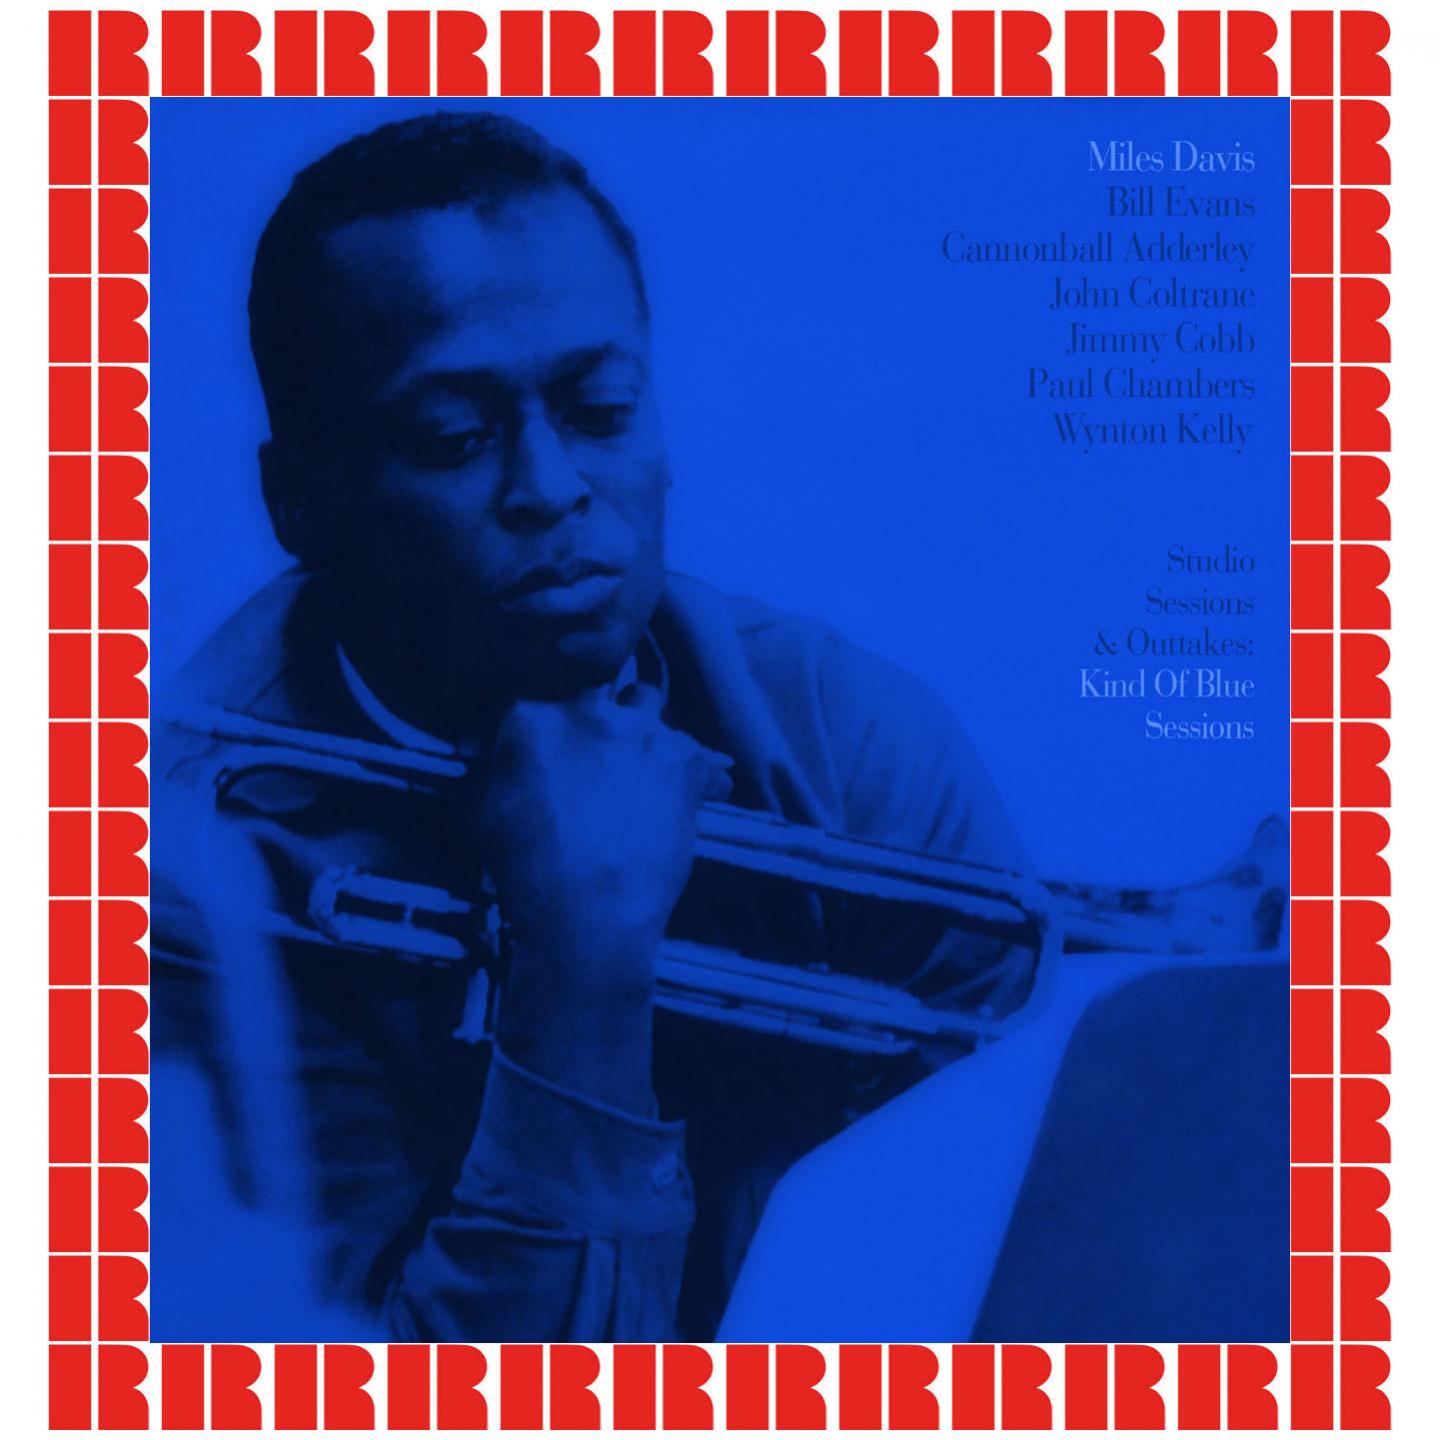 The Complete Kind Of Blue Studio Sessions & Outttakes专辑